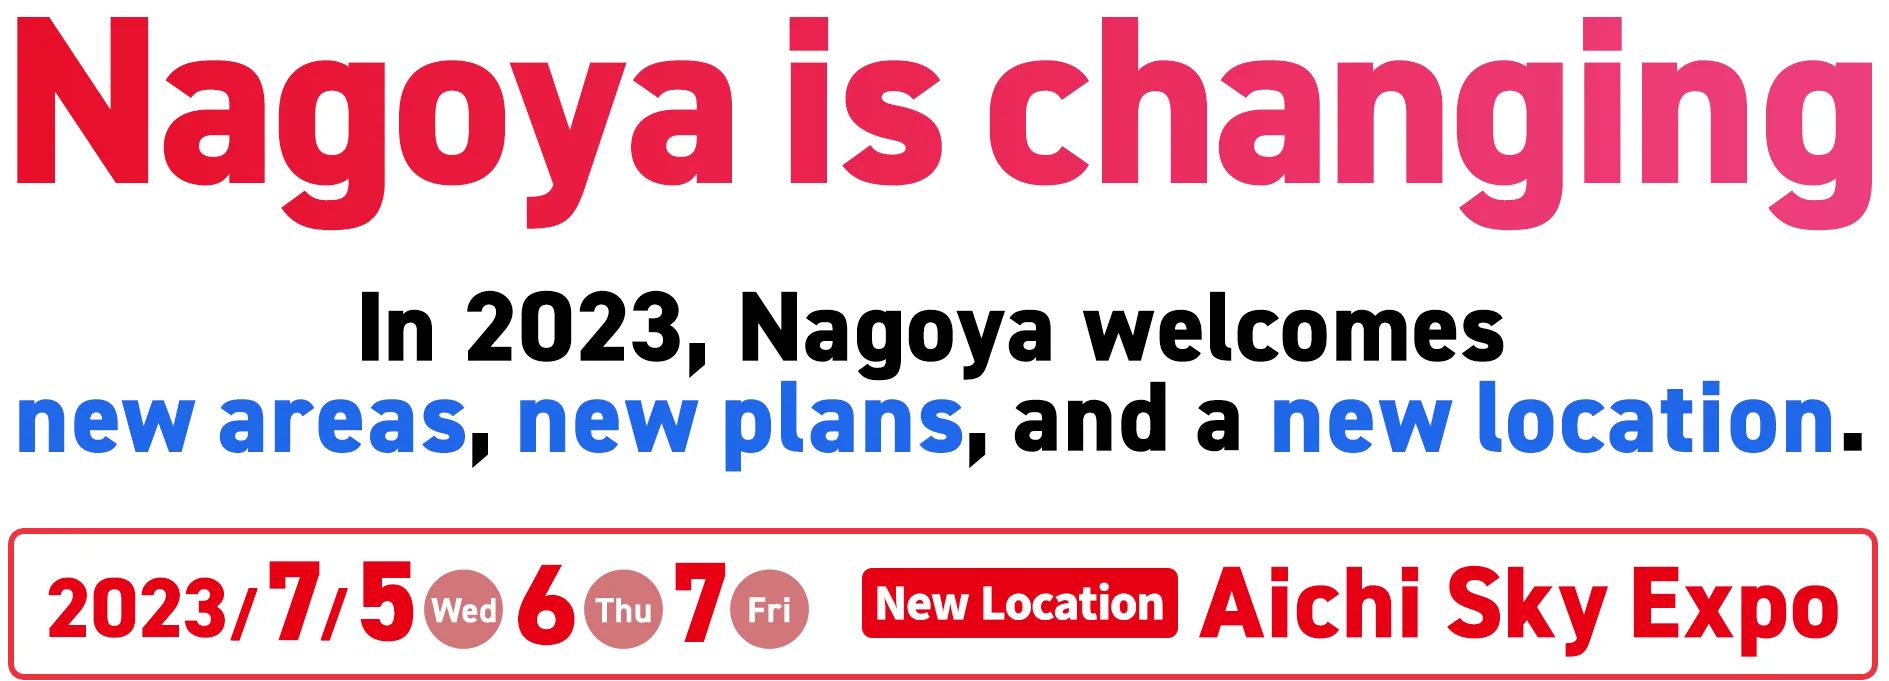 Nagoya is In 2023, Nagoya welcomes new areas, new plans, and a new location. Wed., July 5 / Thu., July 6 / Fri., July 7 New Location Aichi Sky Expo